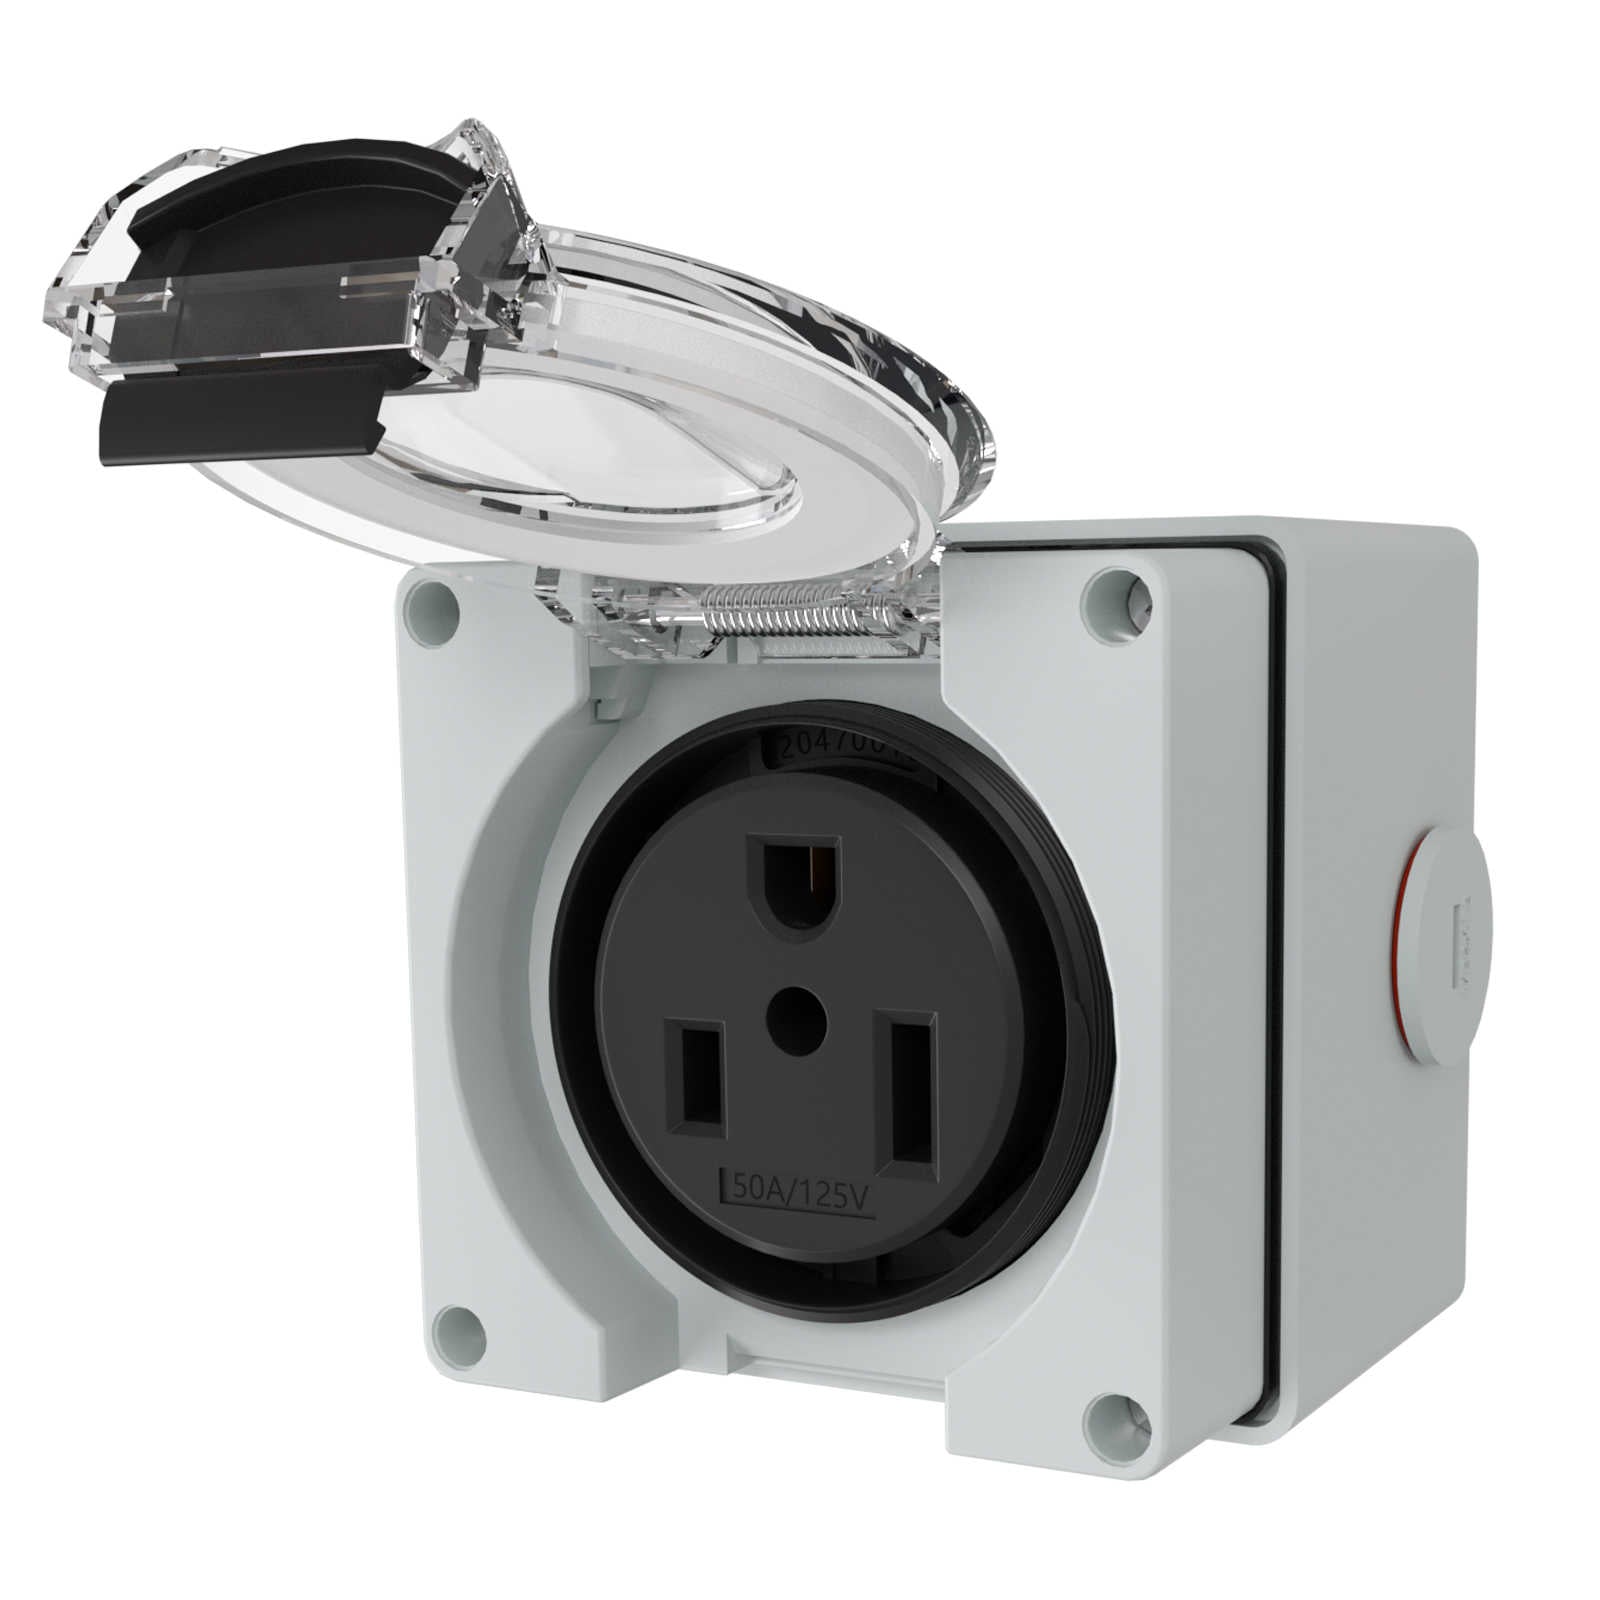 50Amp Power Outlet Box for Electric Vehicles Generators Welding Machines